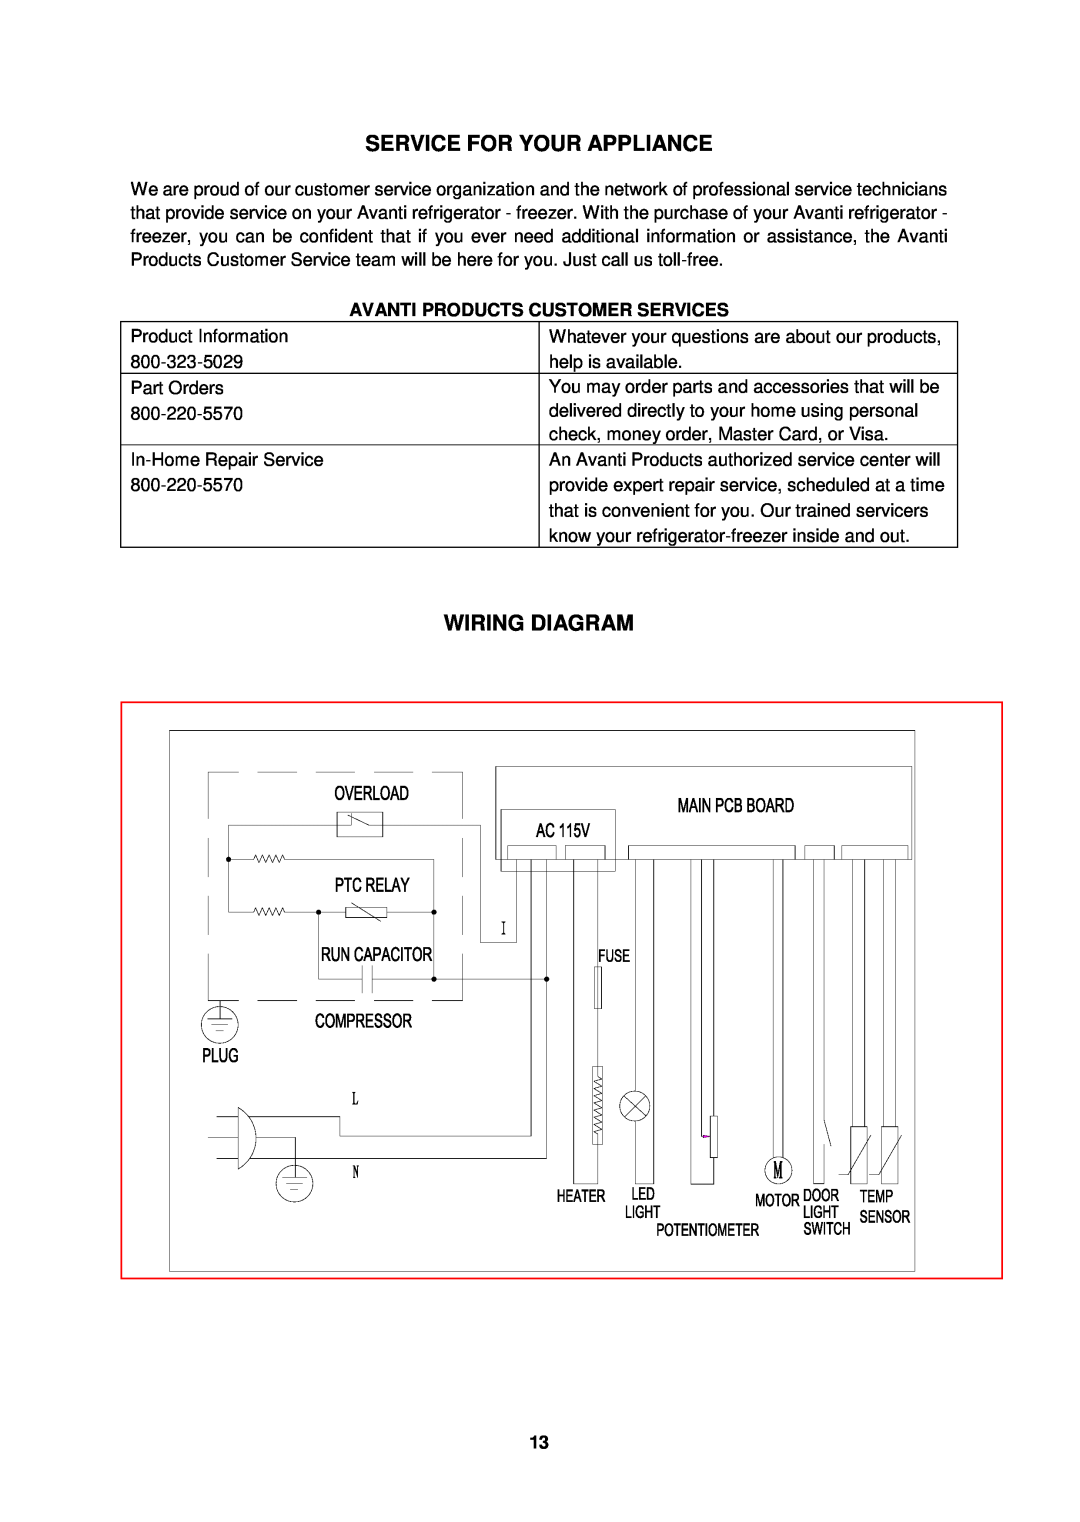 Avanti FFBM923PS, FFBM922W instruction manual Service For Your Appliance, Wiring Diagram, Avanti Products Customer Services 